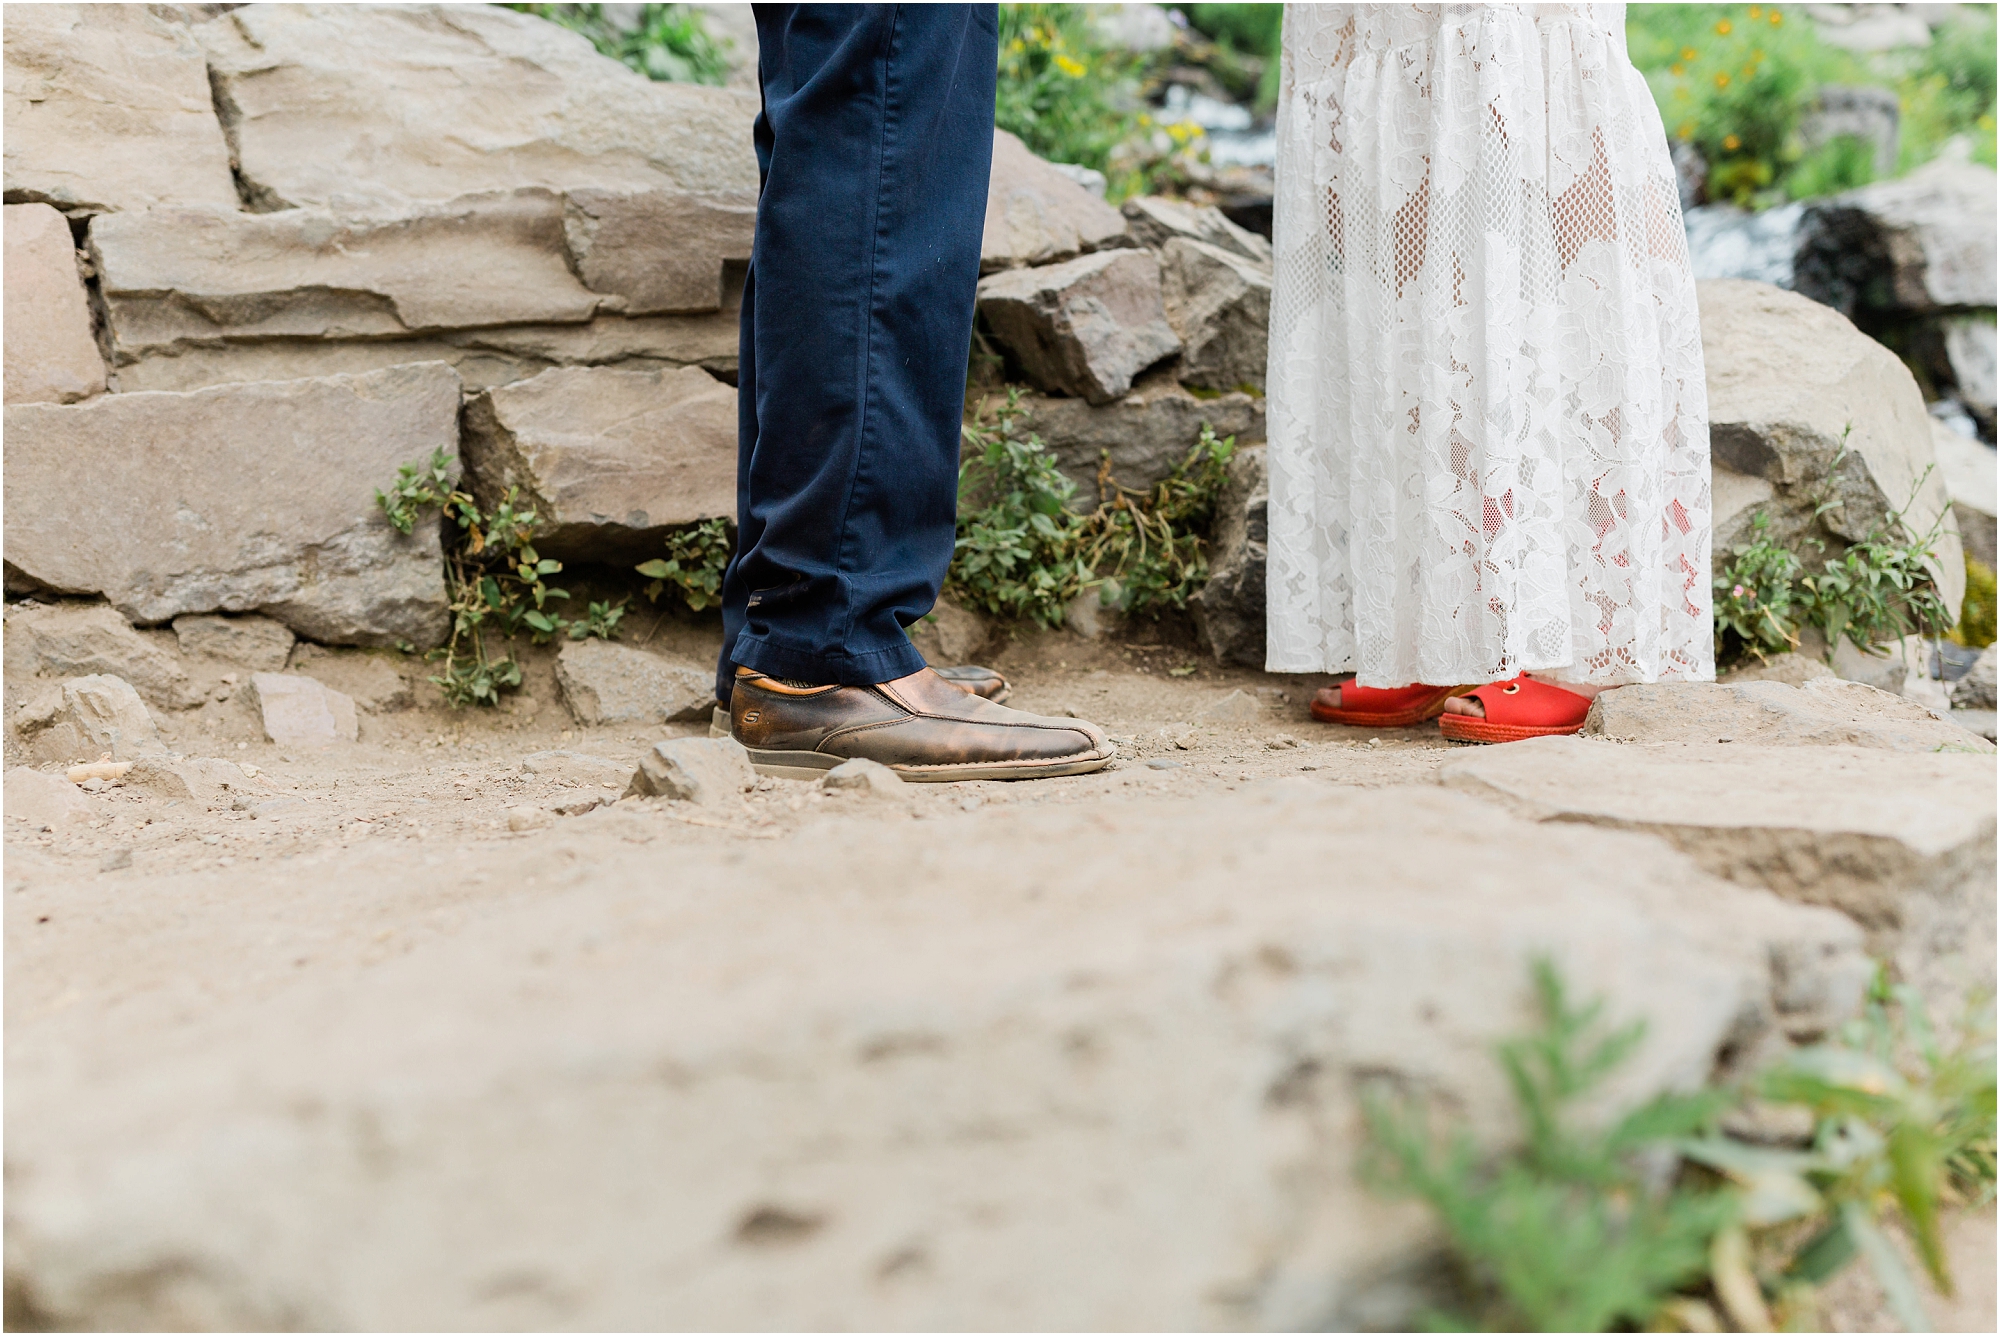 A detail photo of the bride's red rainbow wedge shoes and the groom's leather shoes during their intimate wedding ceremony in Crater Lake National Park. | Erica Swantek Photography